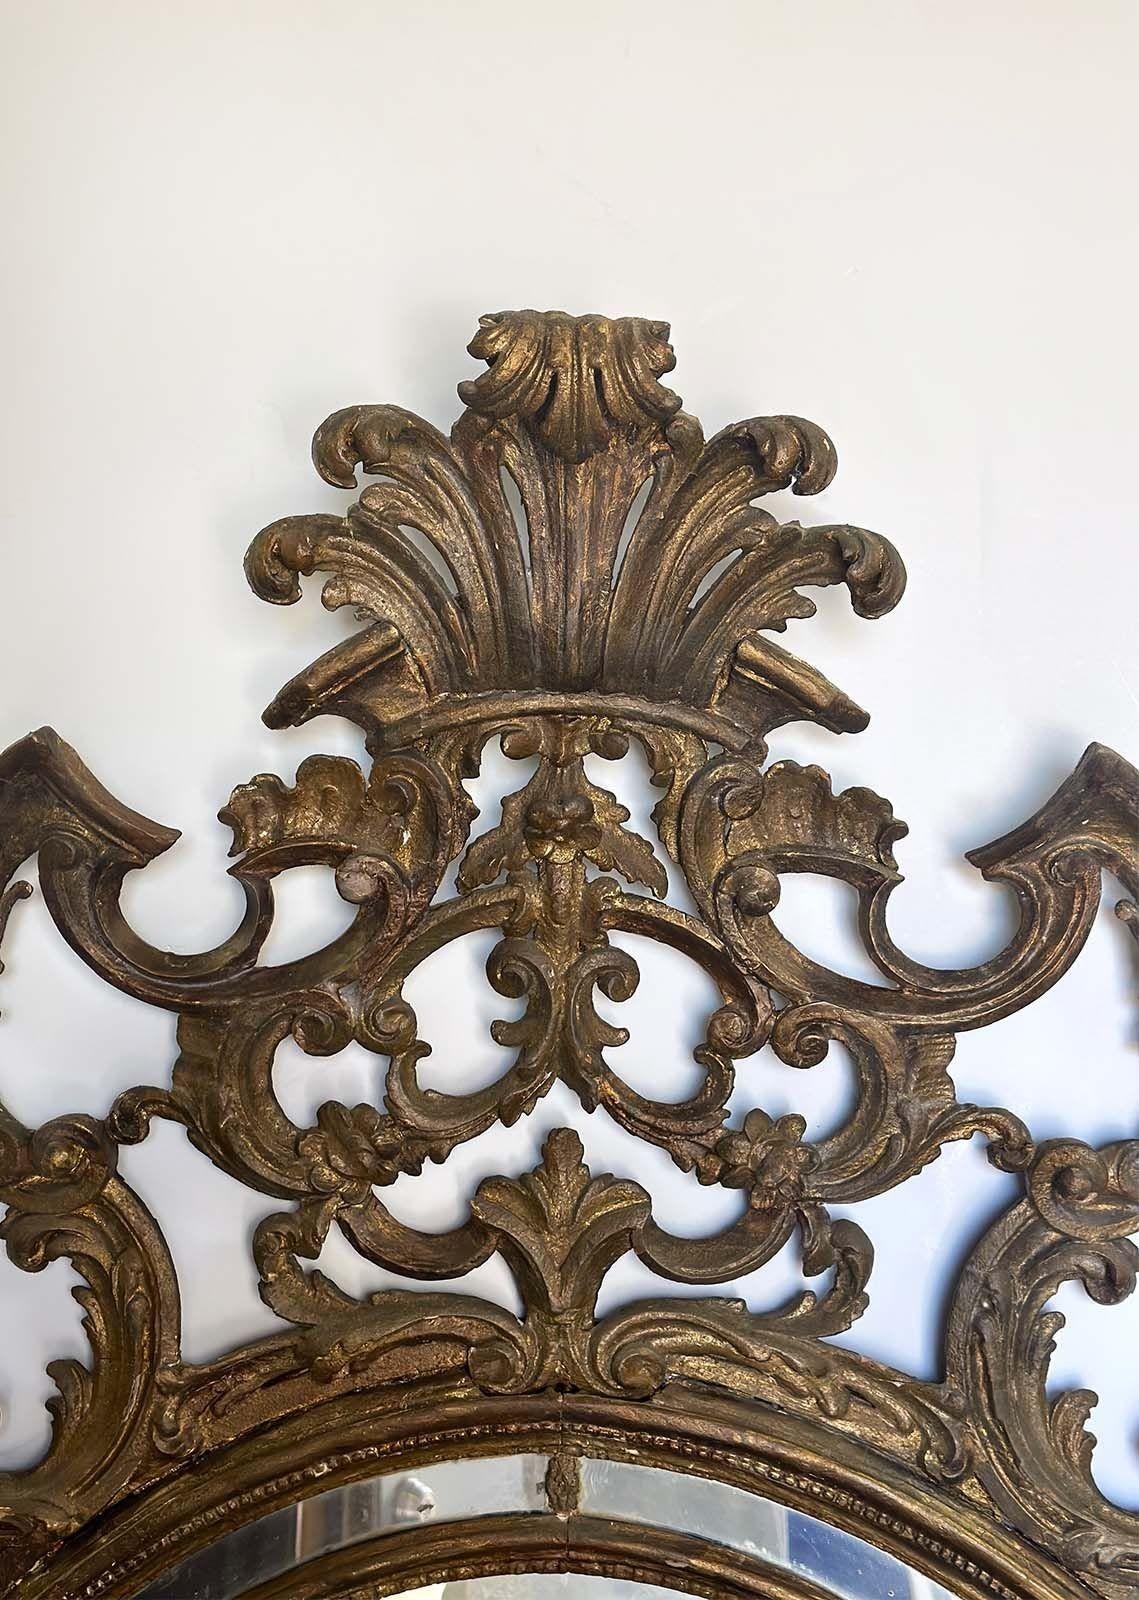 Beautiful 19th Century French carved gilt wood Rococo mirror. This mirror showcases the finest details of the Rococo style and has a very unique carving to it.
Dimensions:
68.5